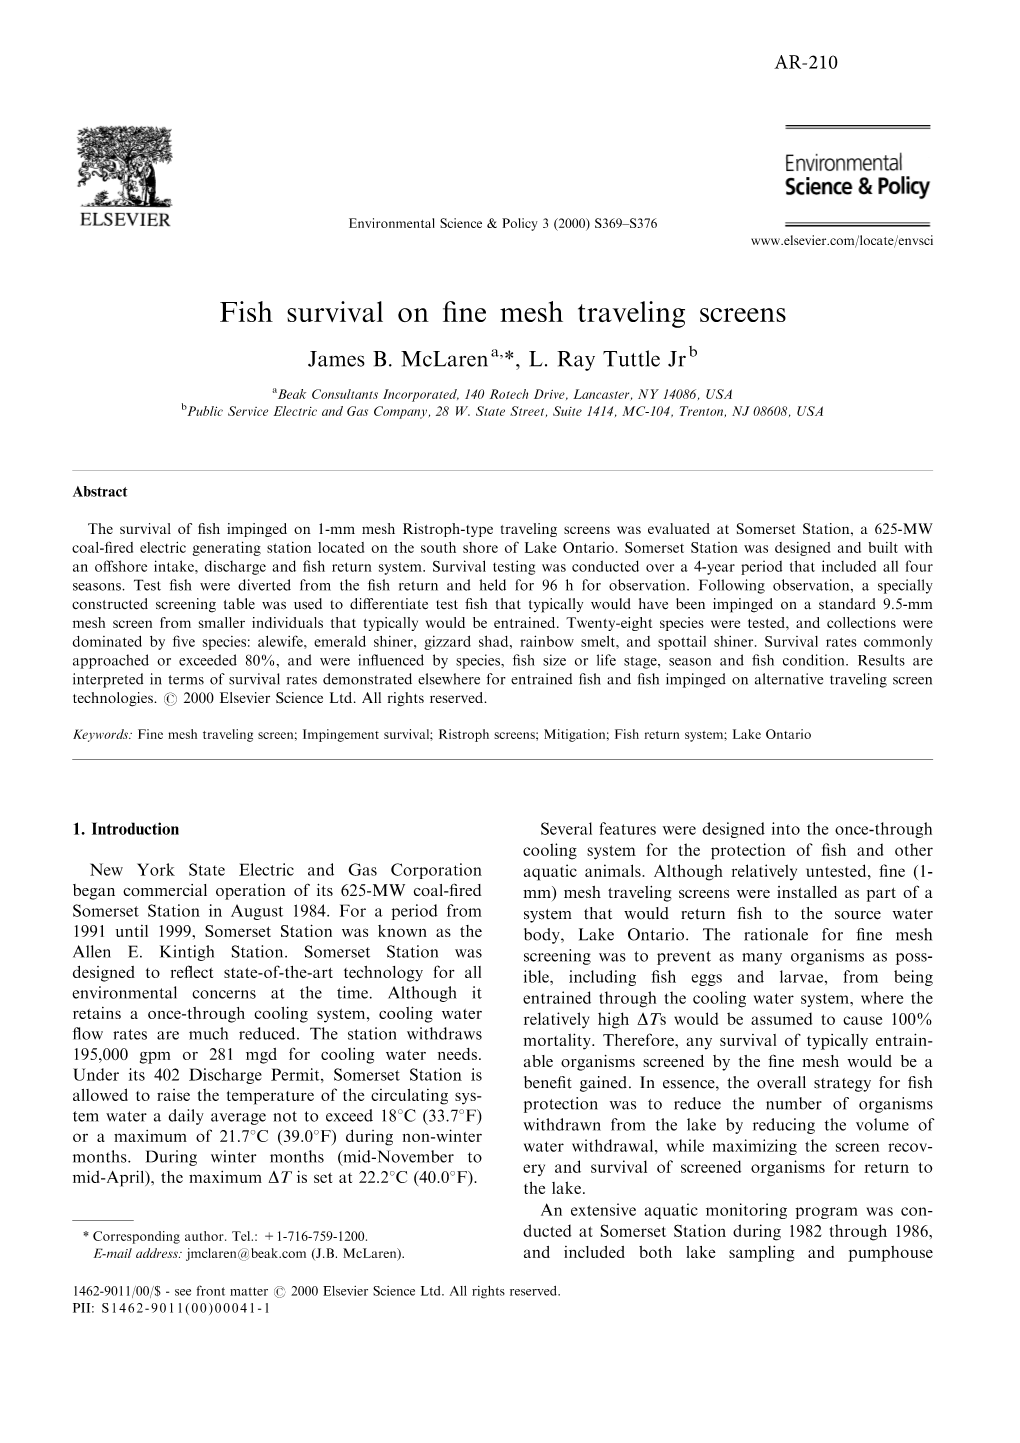 Fish Survival on Fine Mesh Traveling Screens